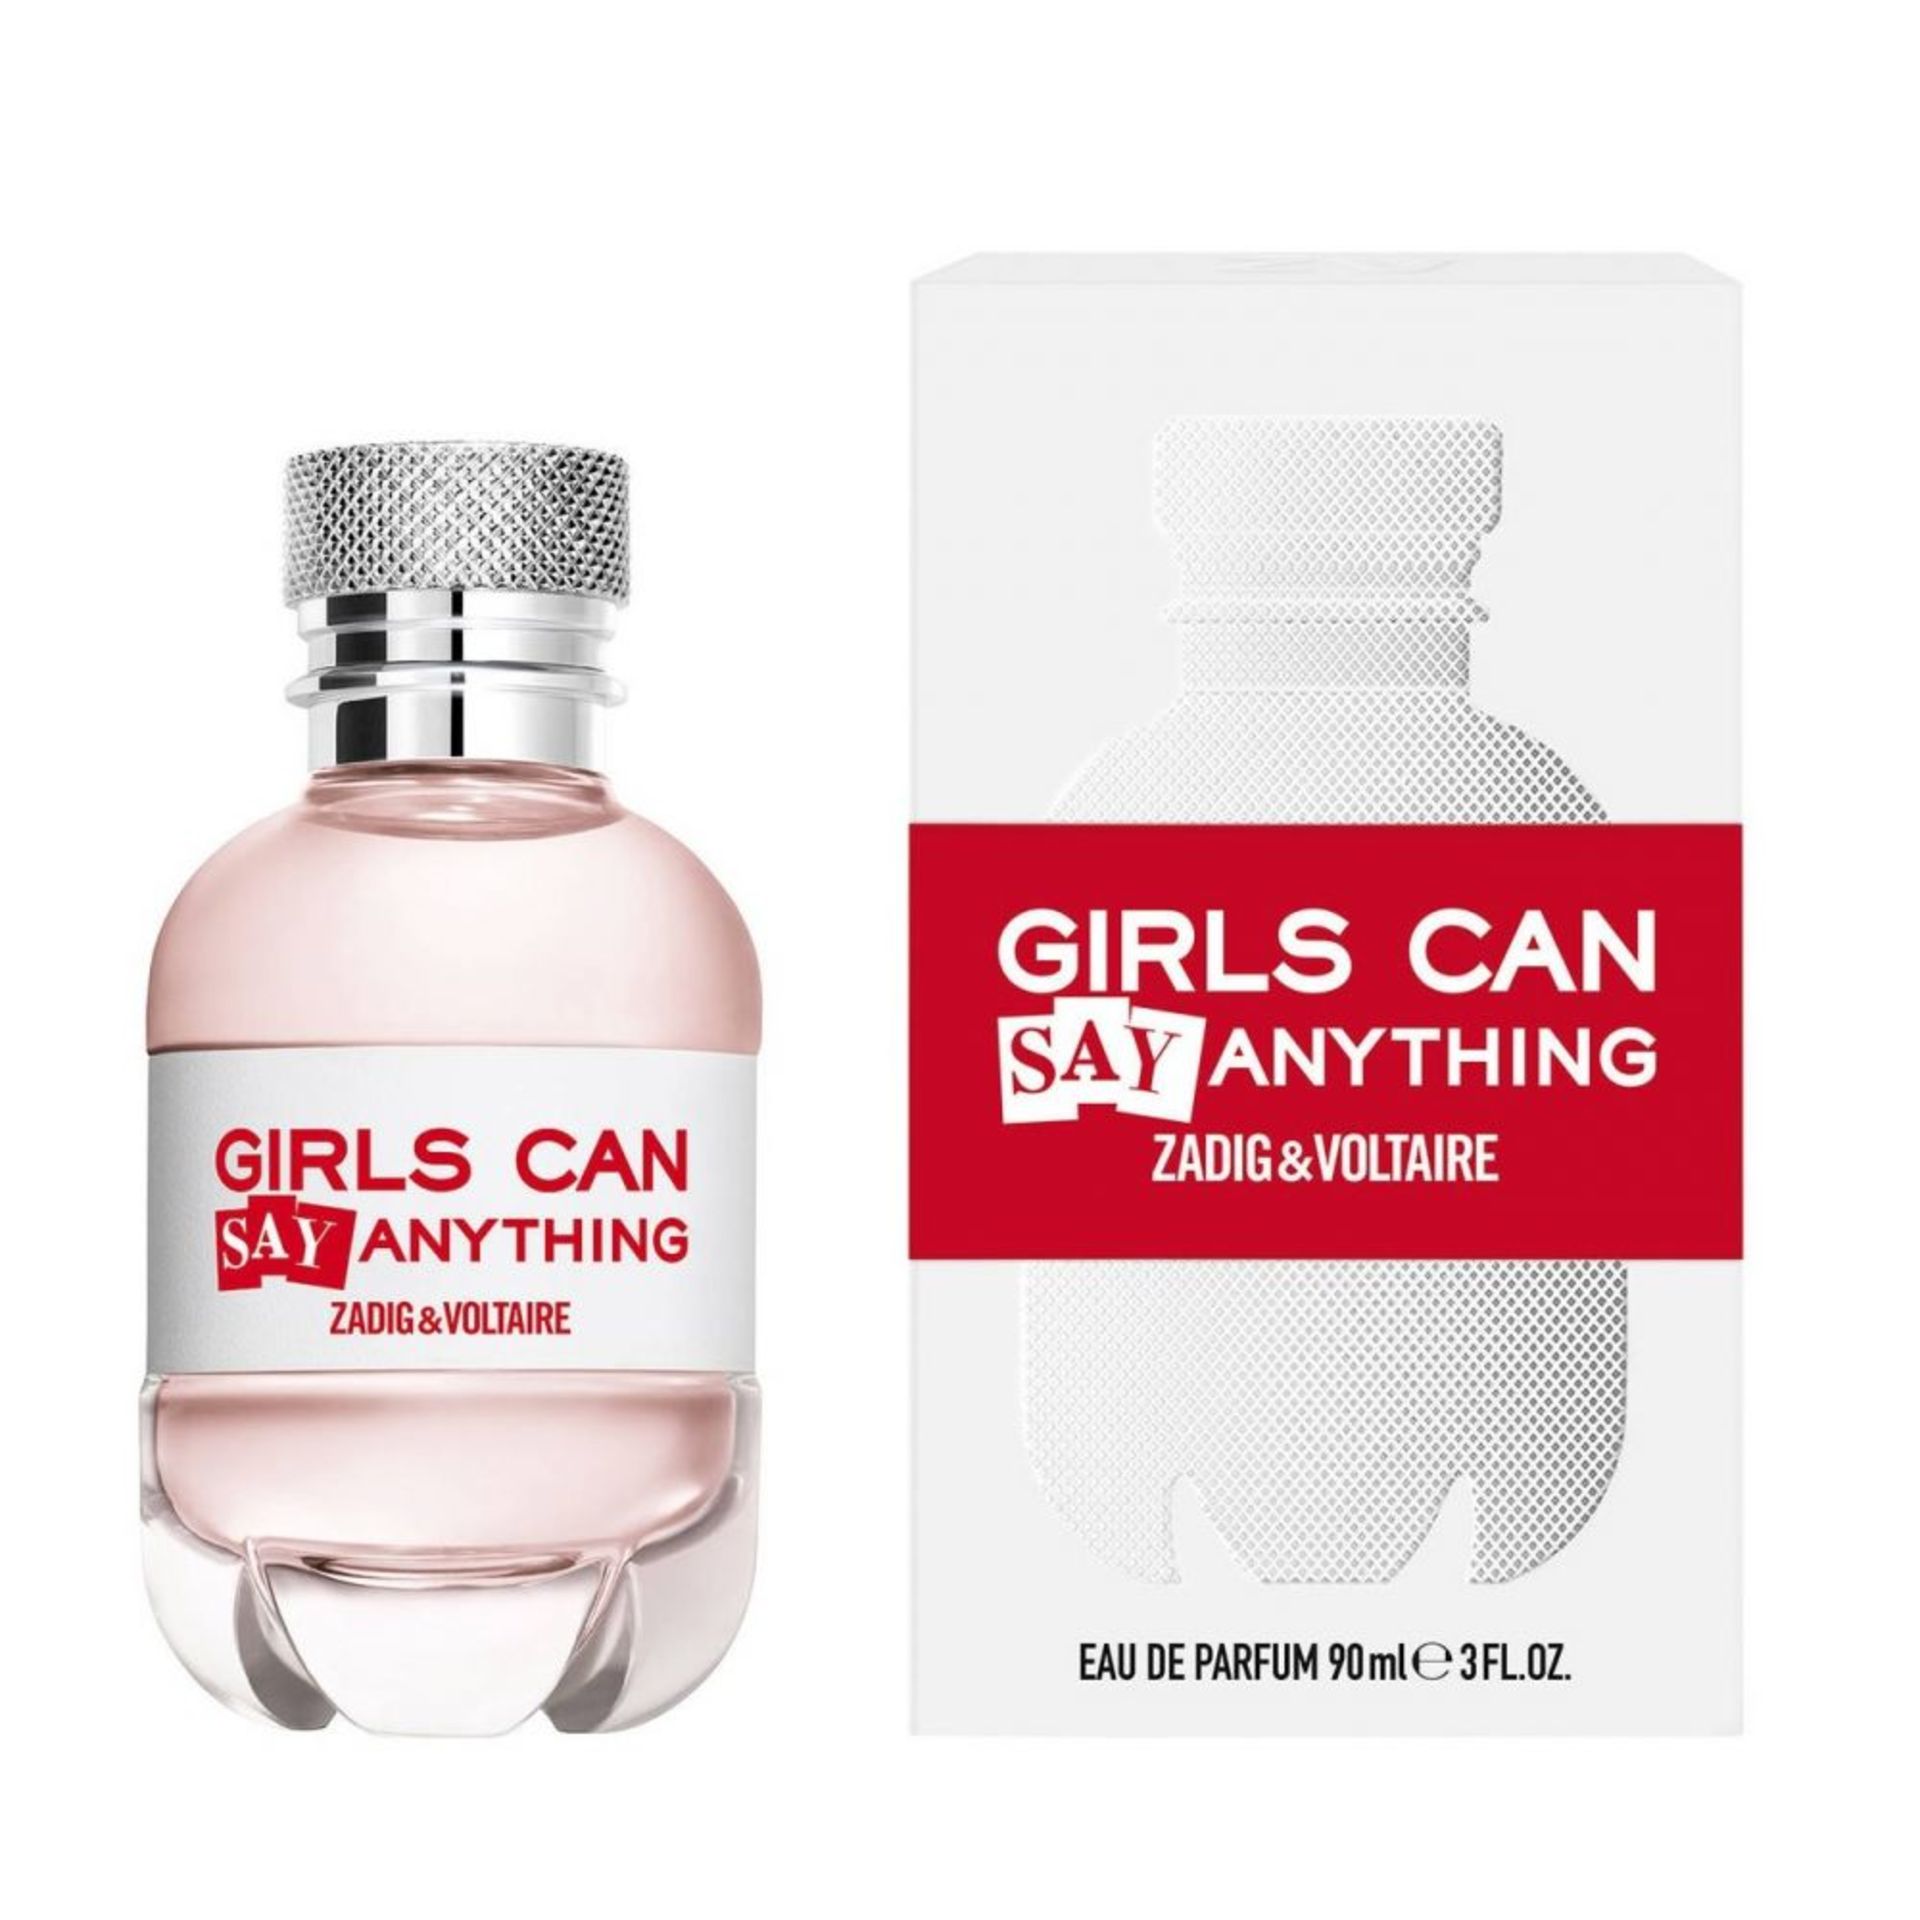 V Brand New Zadig & Voltaire Girls Can SAY Anything 50ml EDP Spray